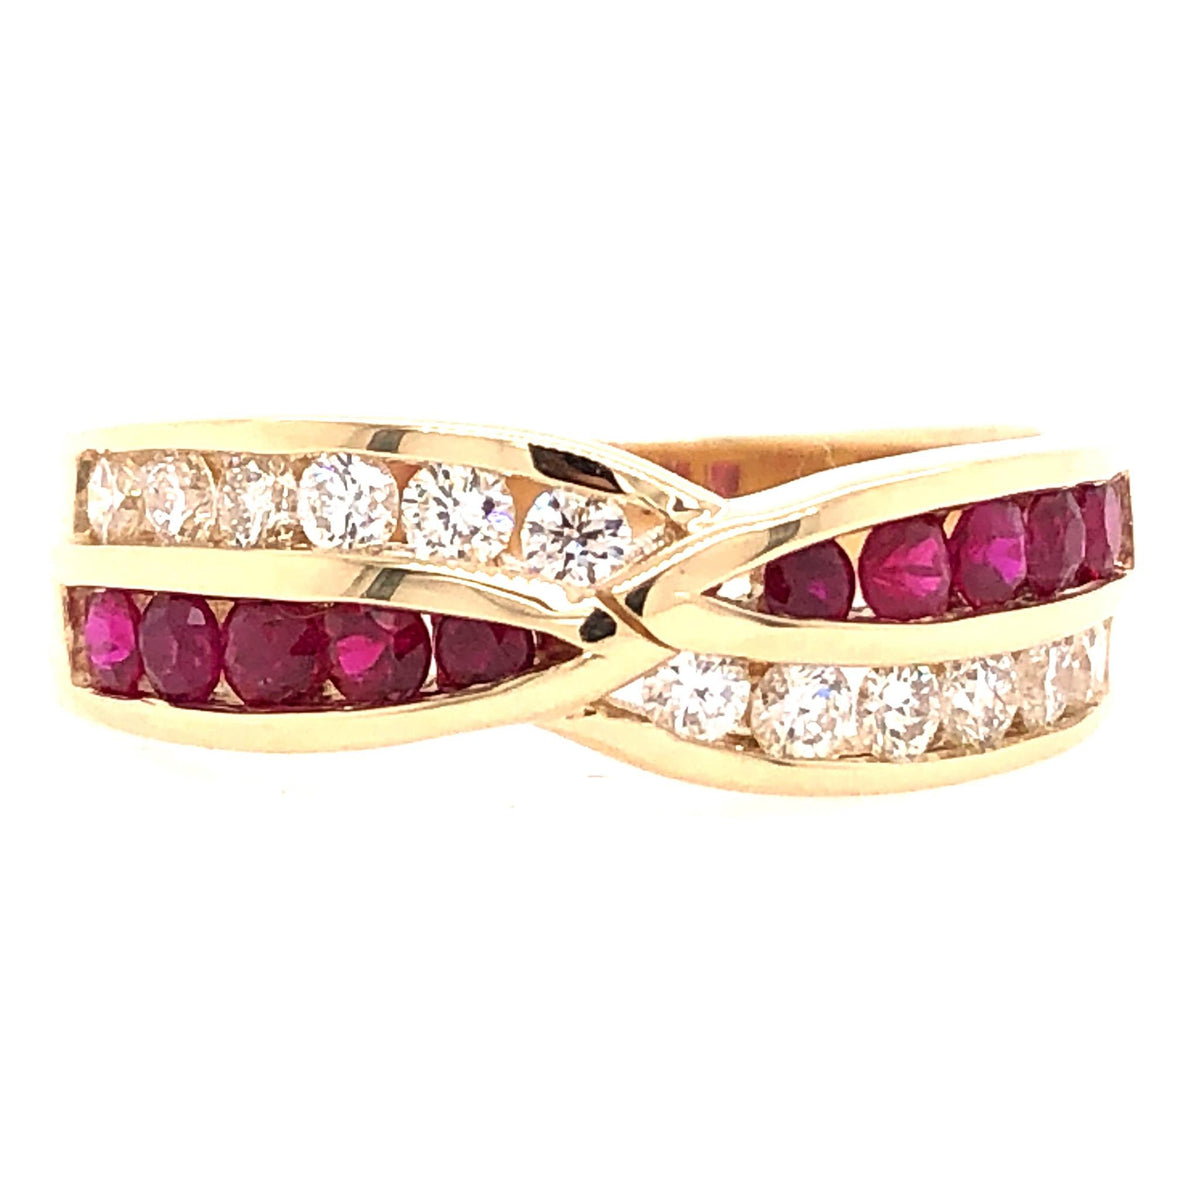 14Kt Yellow Gold Contemporary Gemstone Ring With Rubies